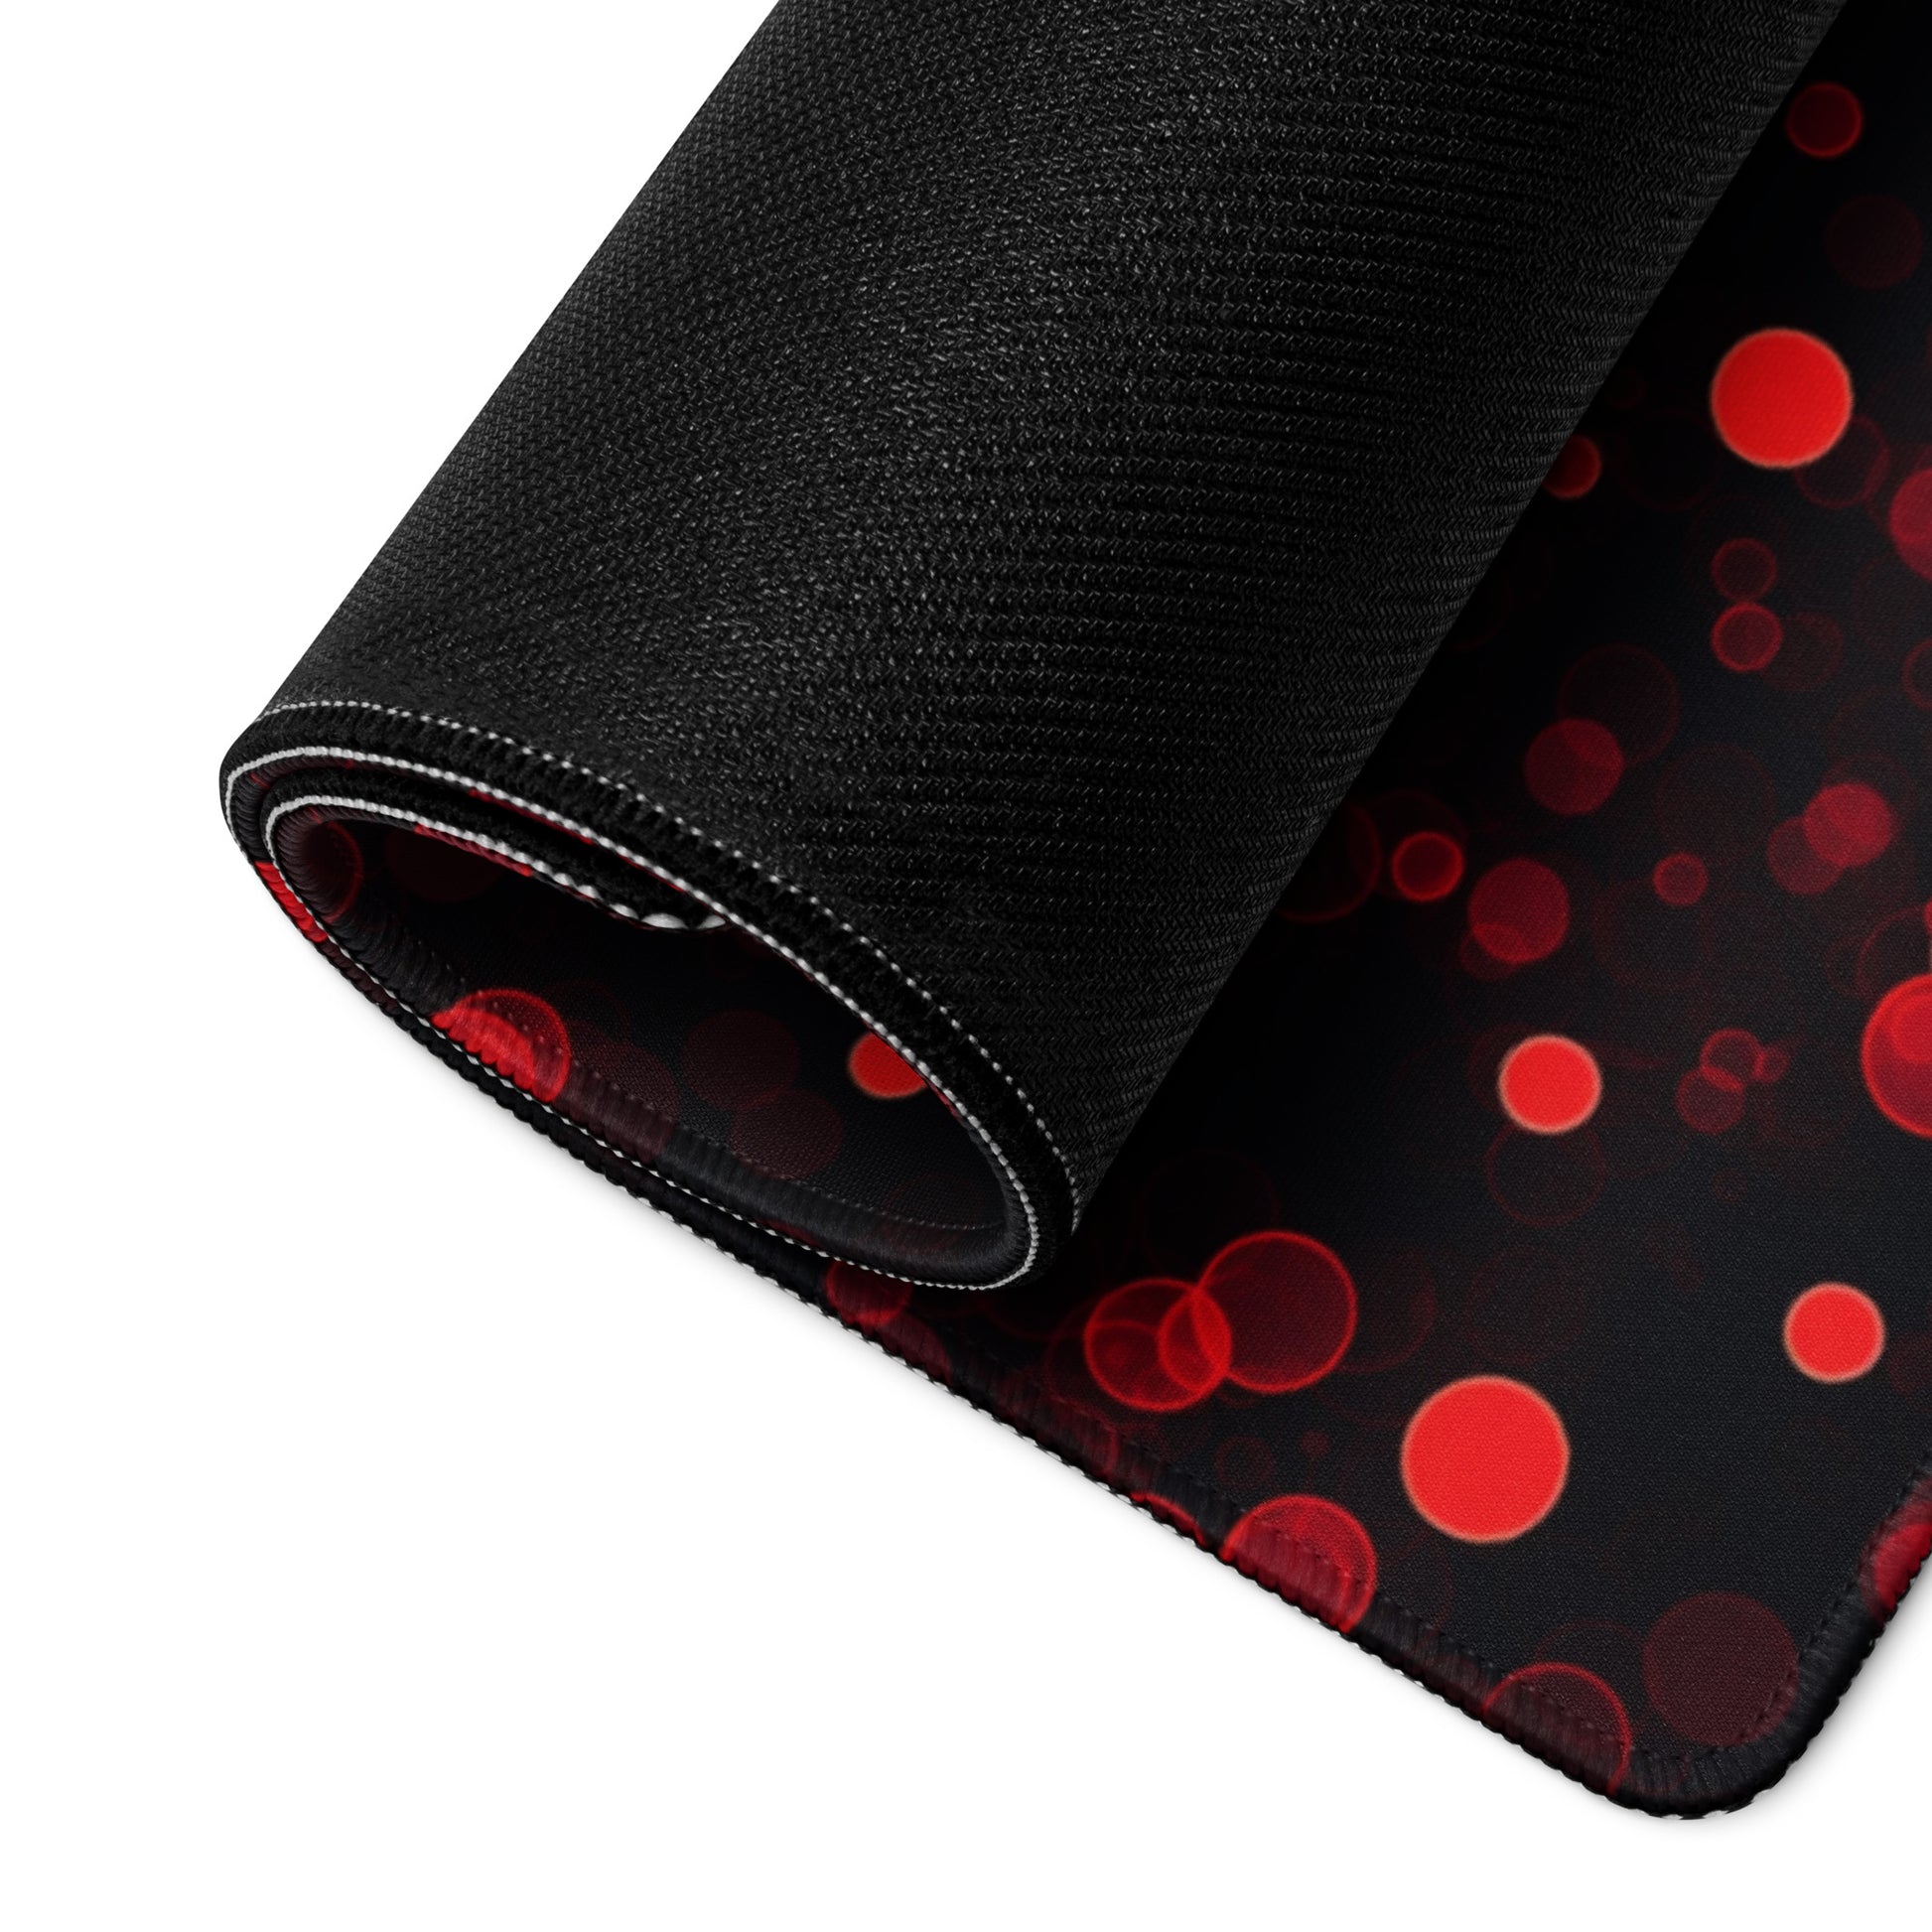 A 36" x 18" desk pad with red polka dots rolled up.